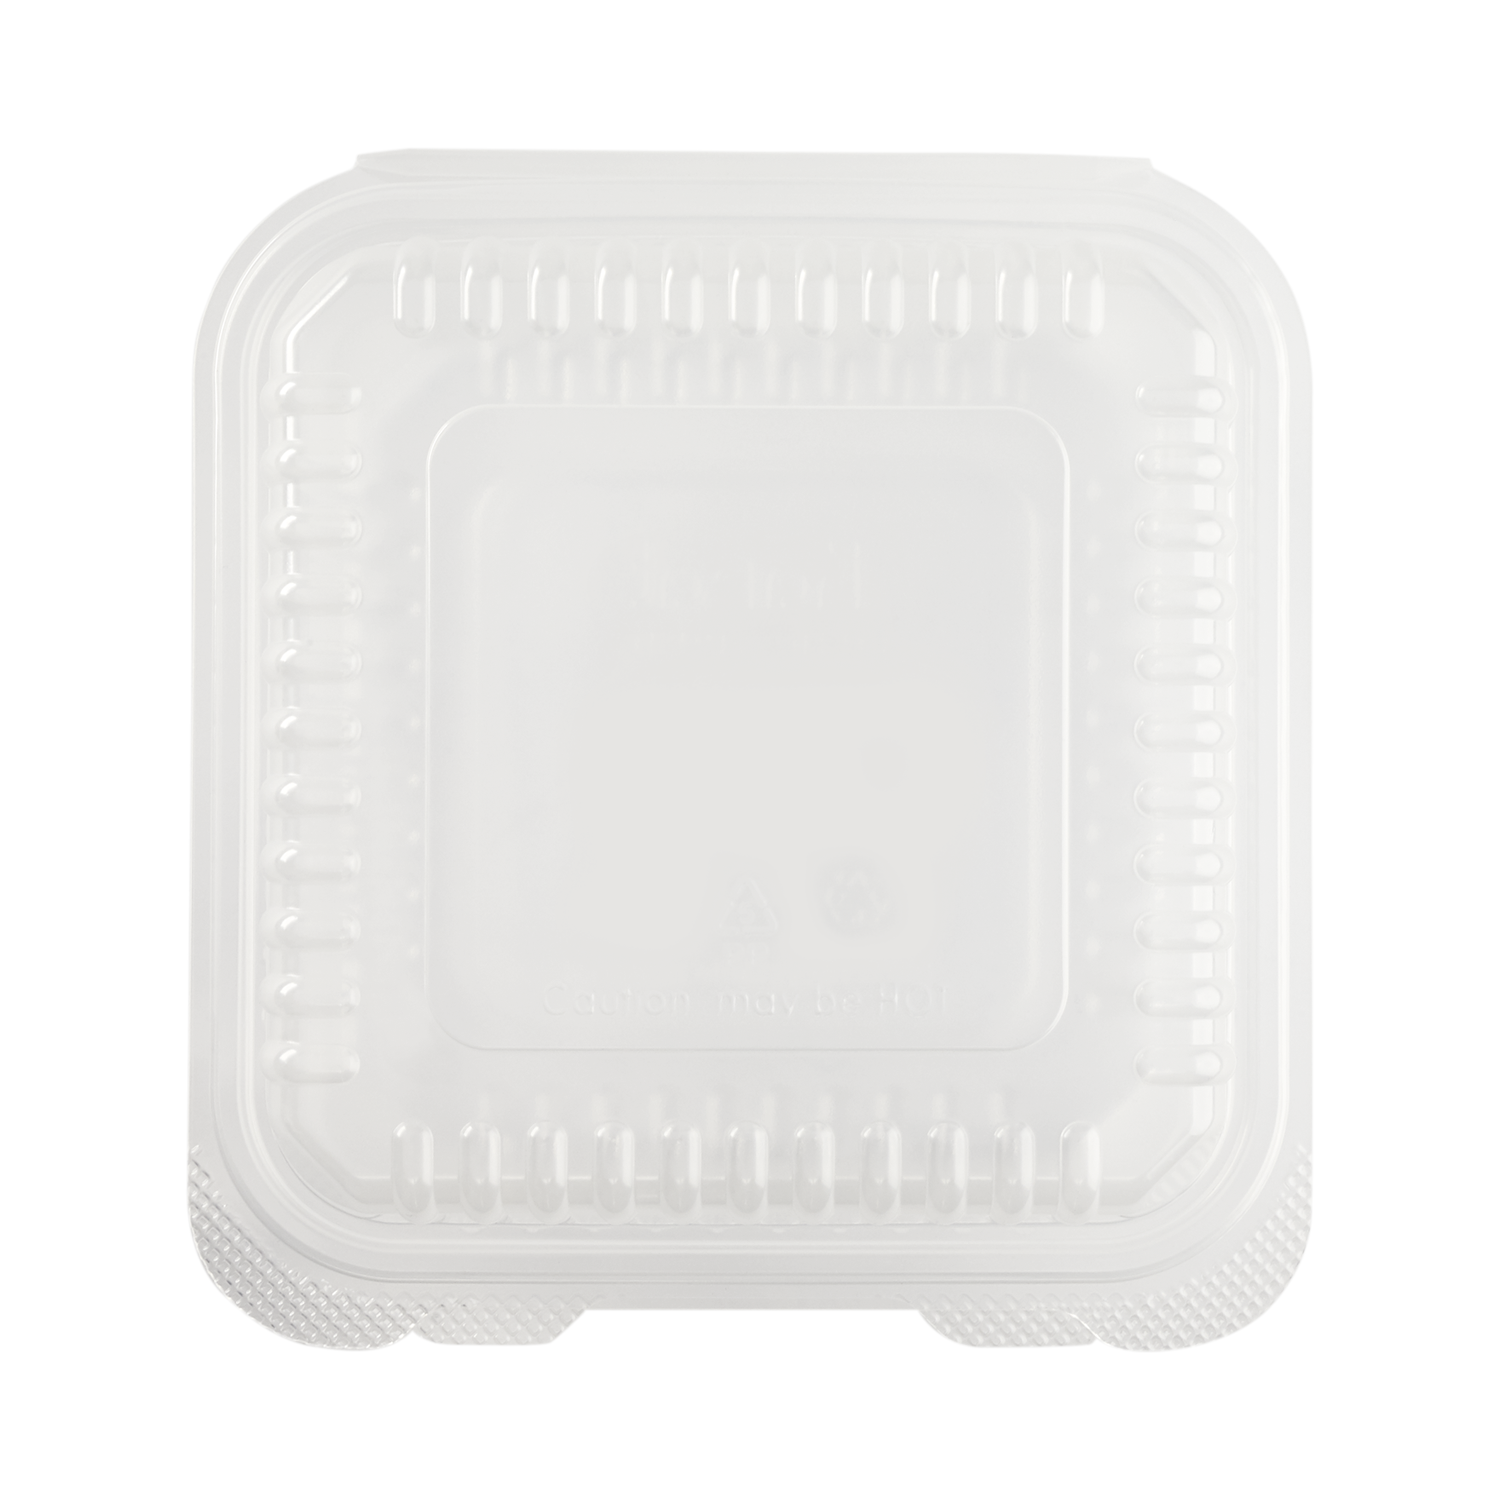 7 oz. BPA Free Food Grade Round Container (T41007CP) - 1000 count - case